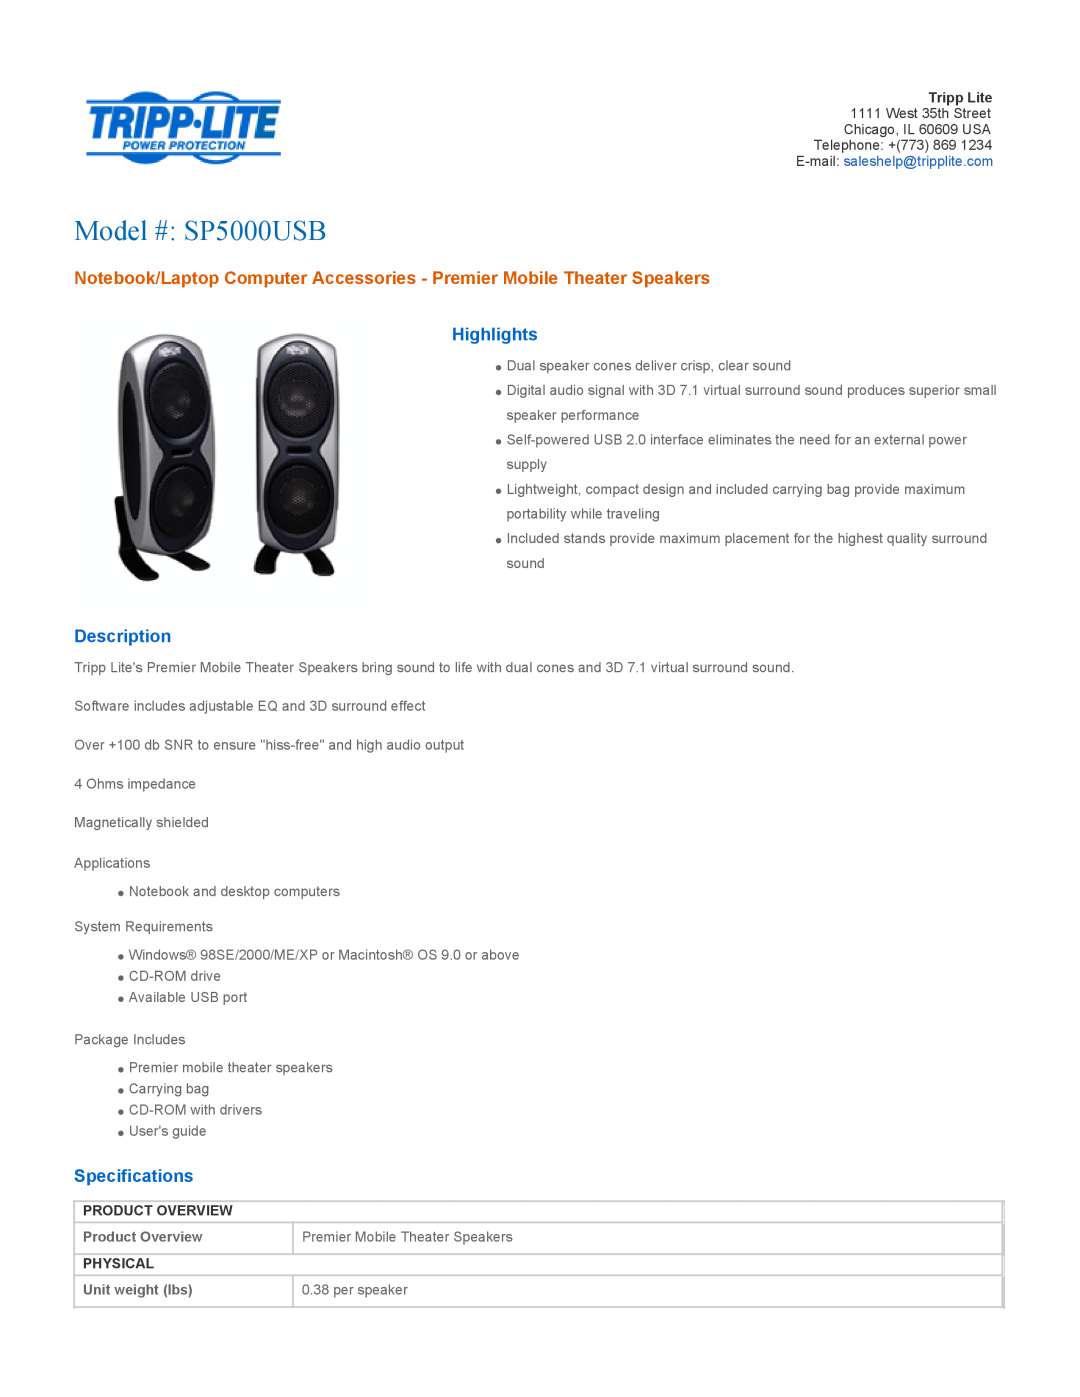 Tripp Lite SP5000USB specifications Product Overview, Premier Mobile Theater Speakers, Physical, Unit weight lbs 